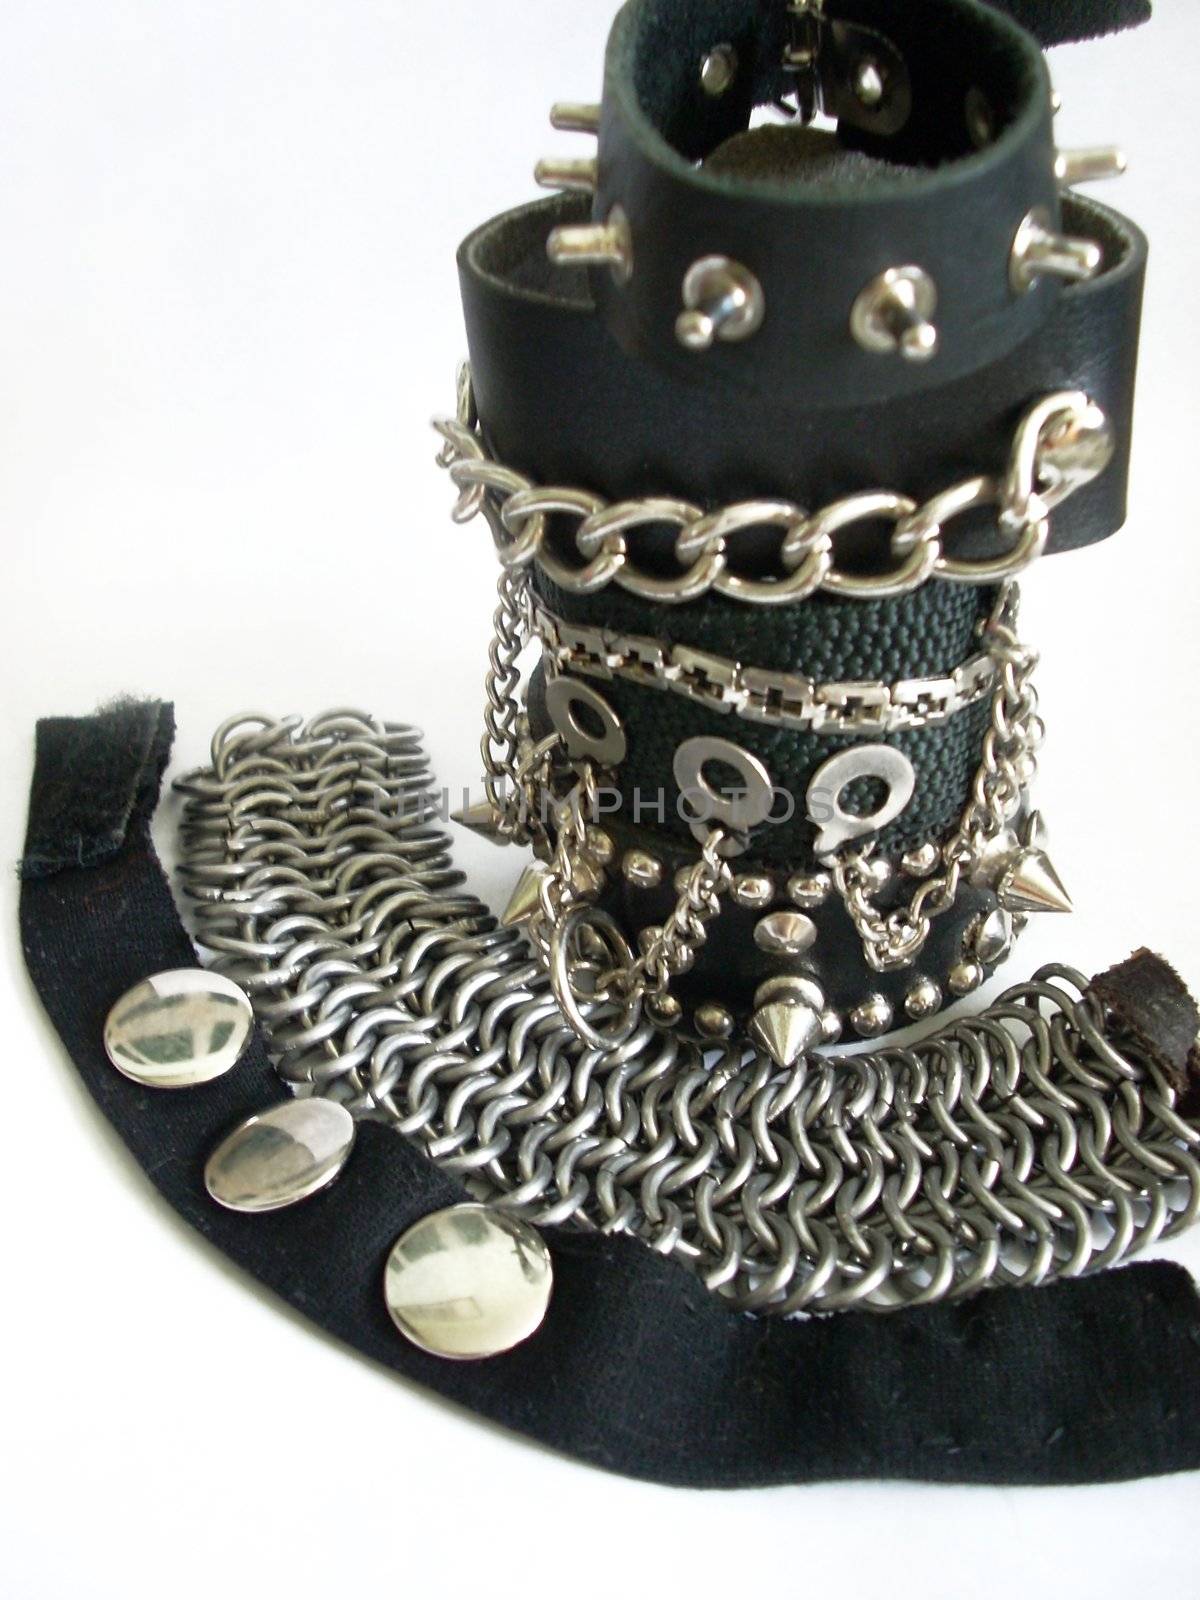 Statue of heavy-metal bracelets made from leather and iron